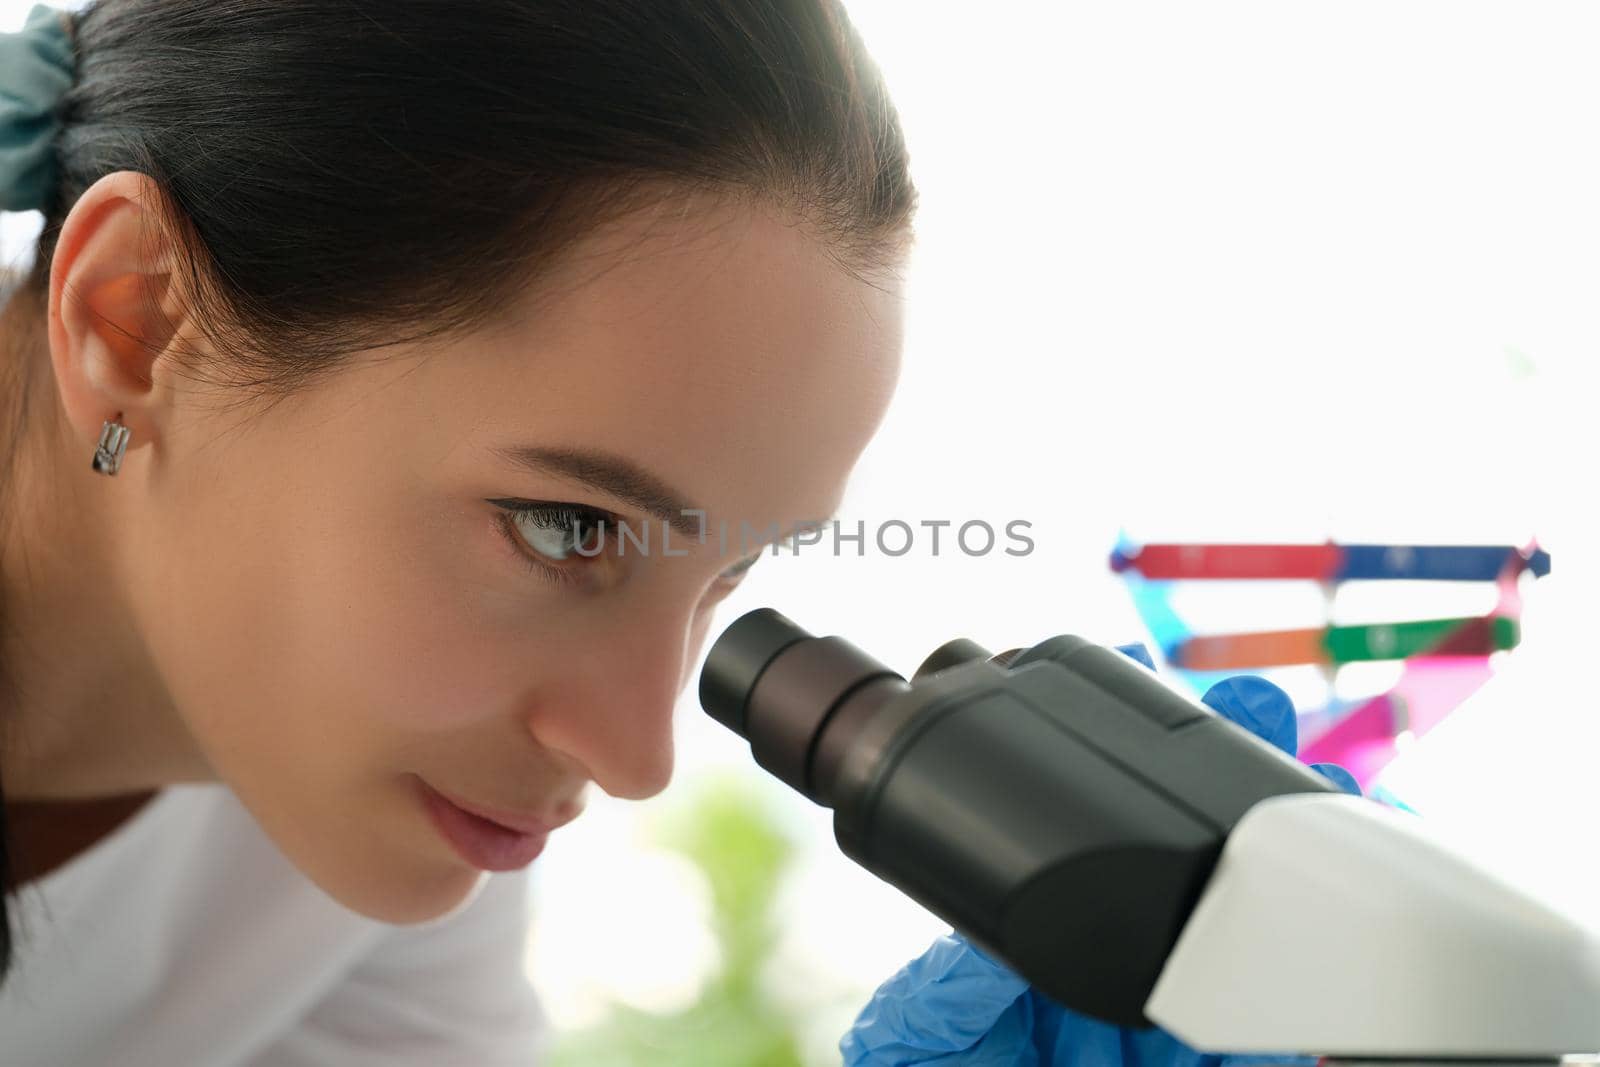 Beautiful woman looks through a microscope, profile view, close-up. DNA research, genetics. Chemical analysis of cells